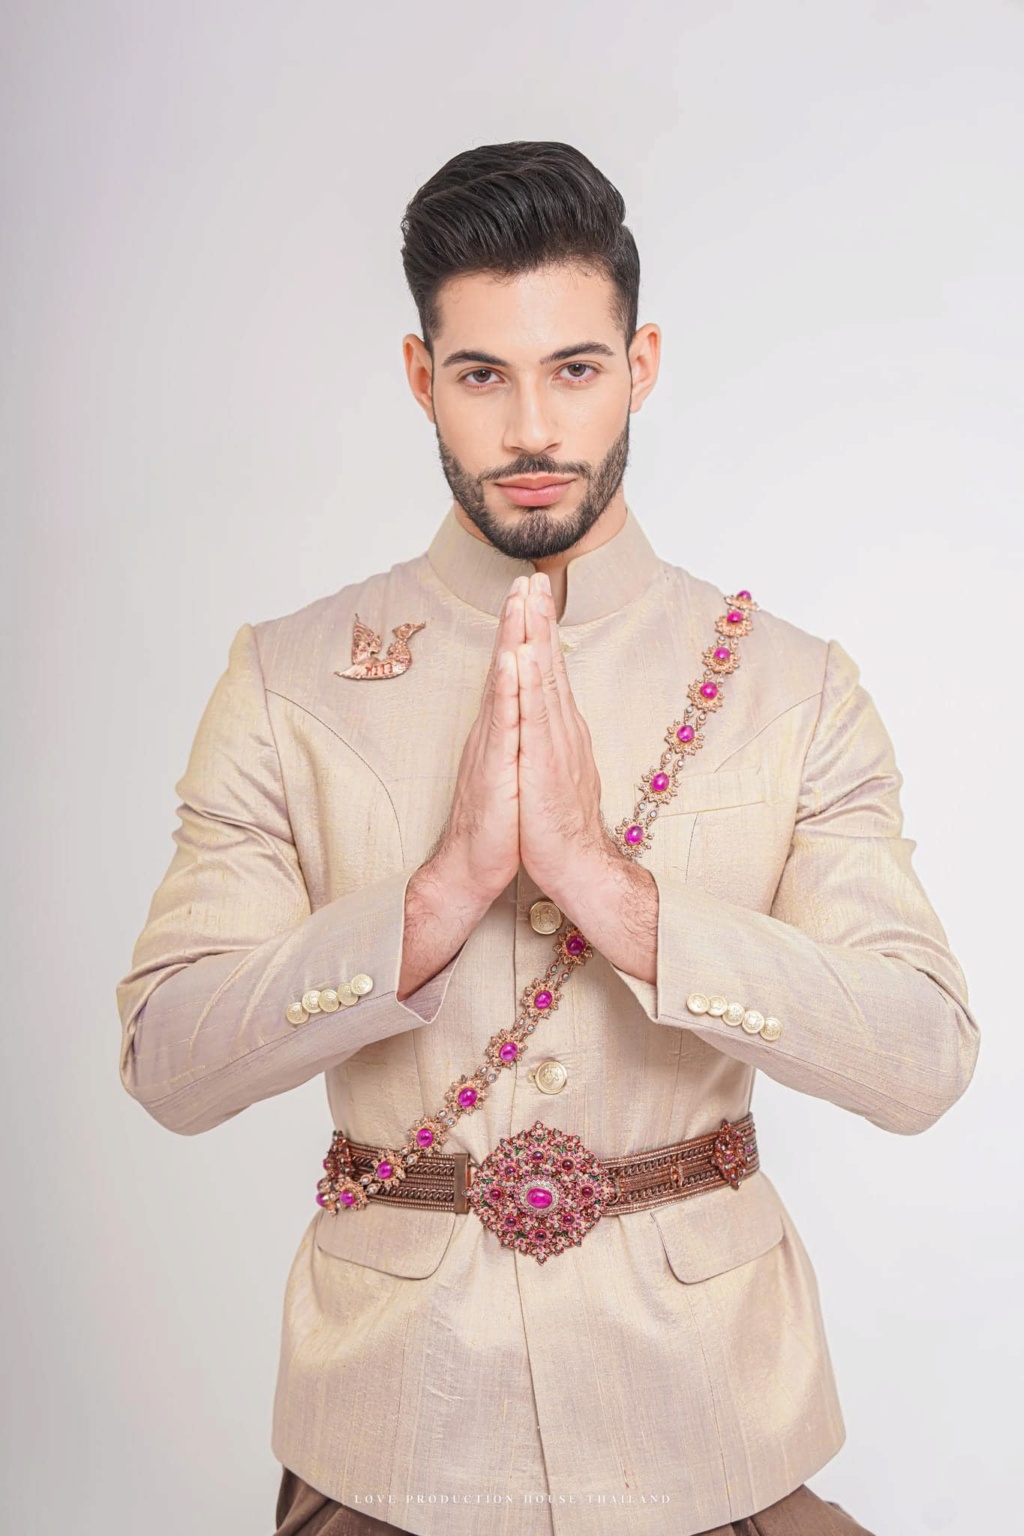 Manuel Franco - MISTER INTERNATIONAL 2022 - Official Thread (DOMINICAN REPUBLIC) Thai Version - Page 3 34061512